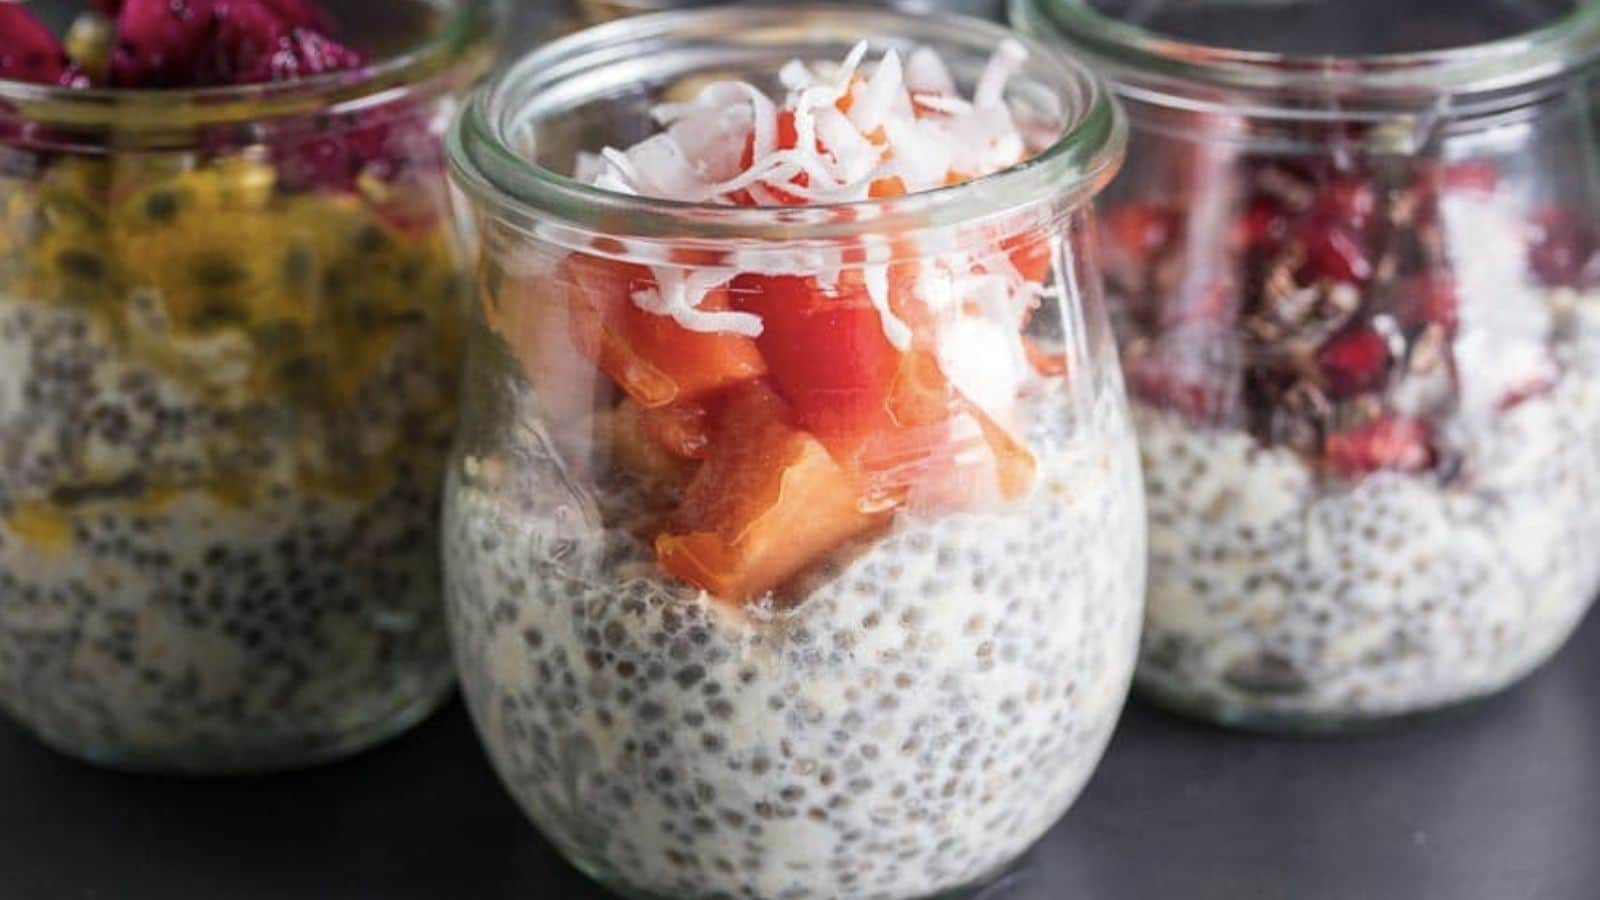 Three jars filled with chia overnight oats.
